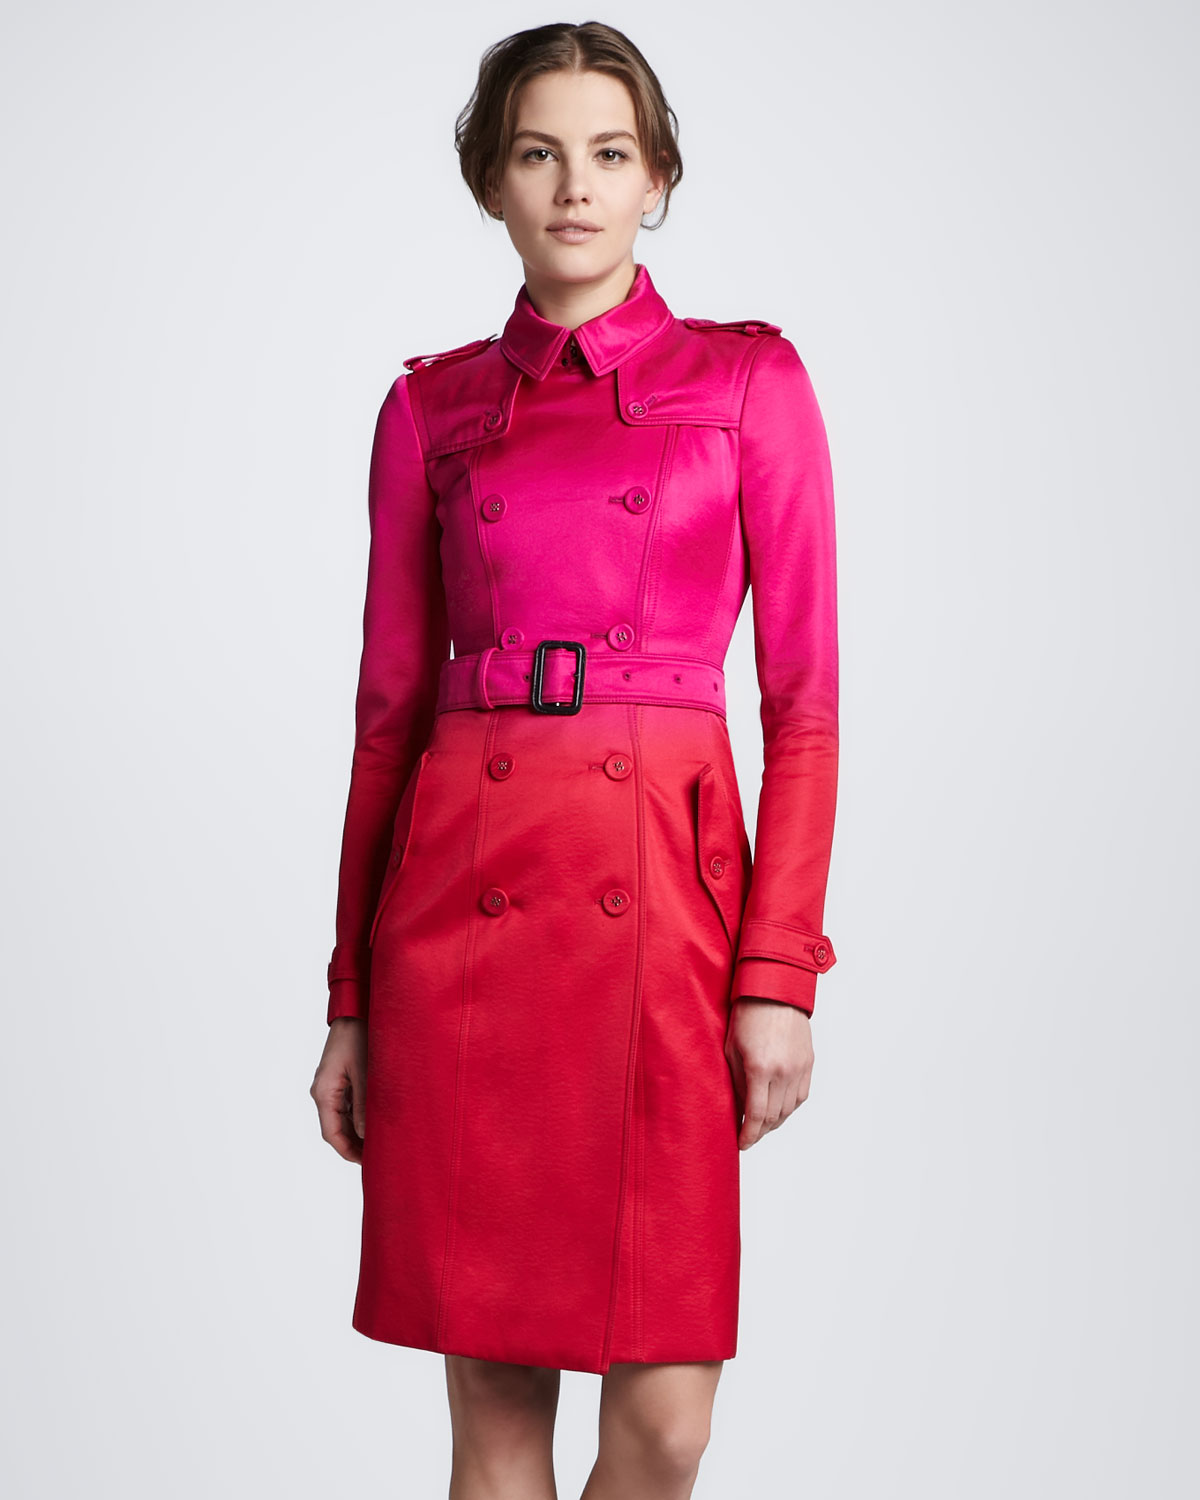 Burberry prorsum Twotone Silk Trenchcoat in Pink | Lyst